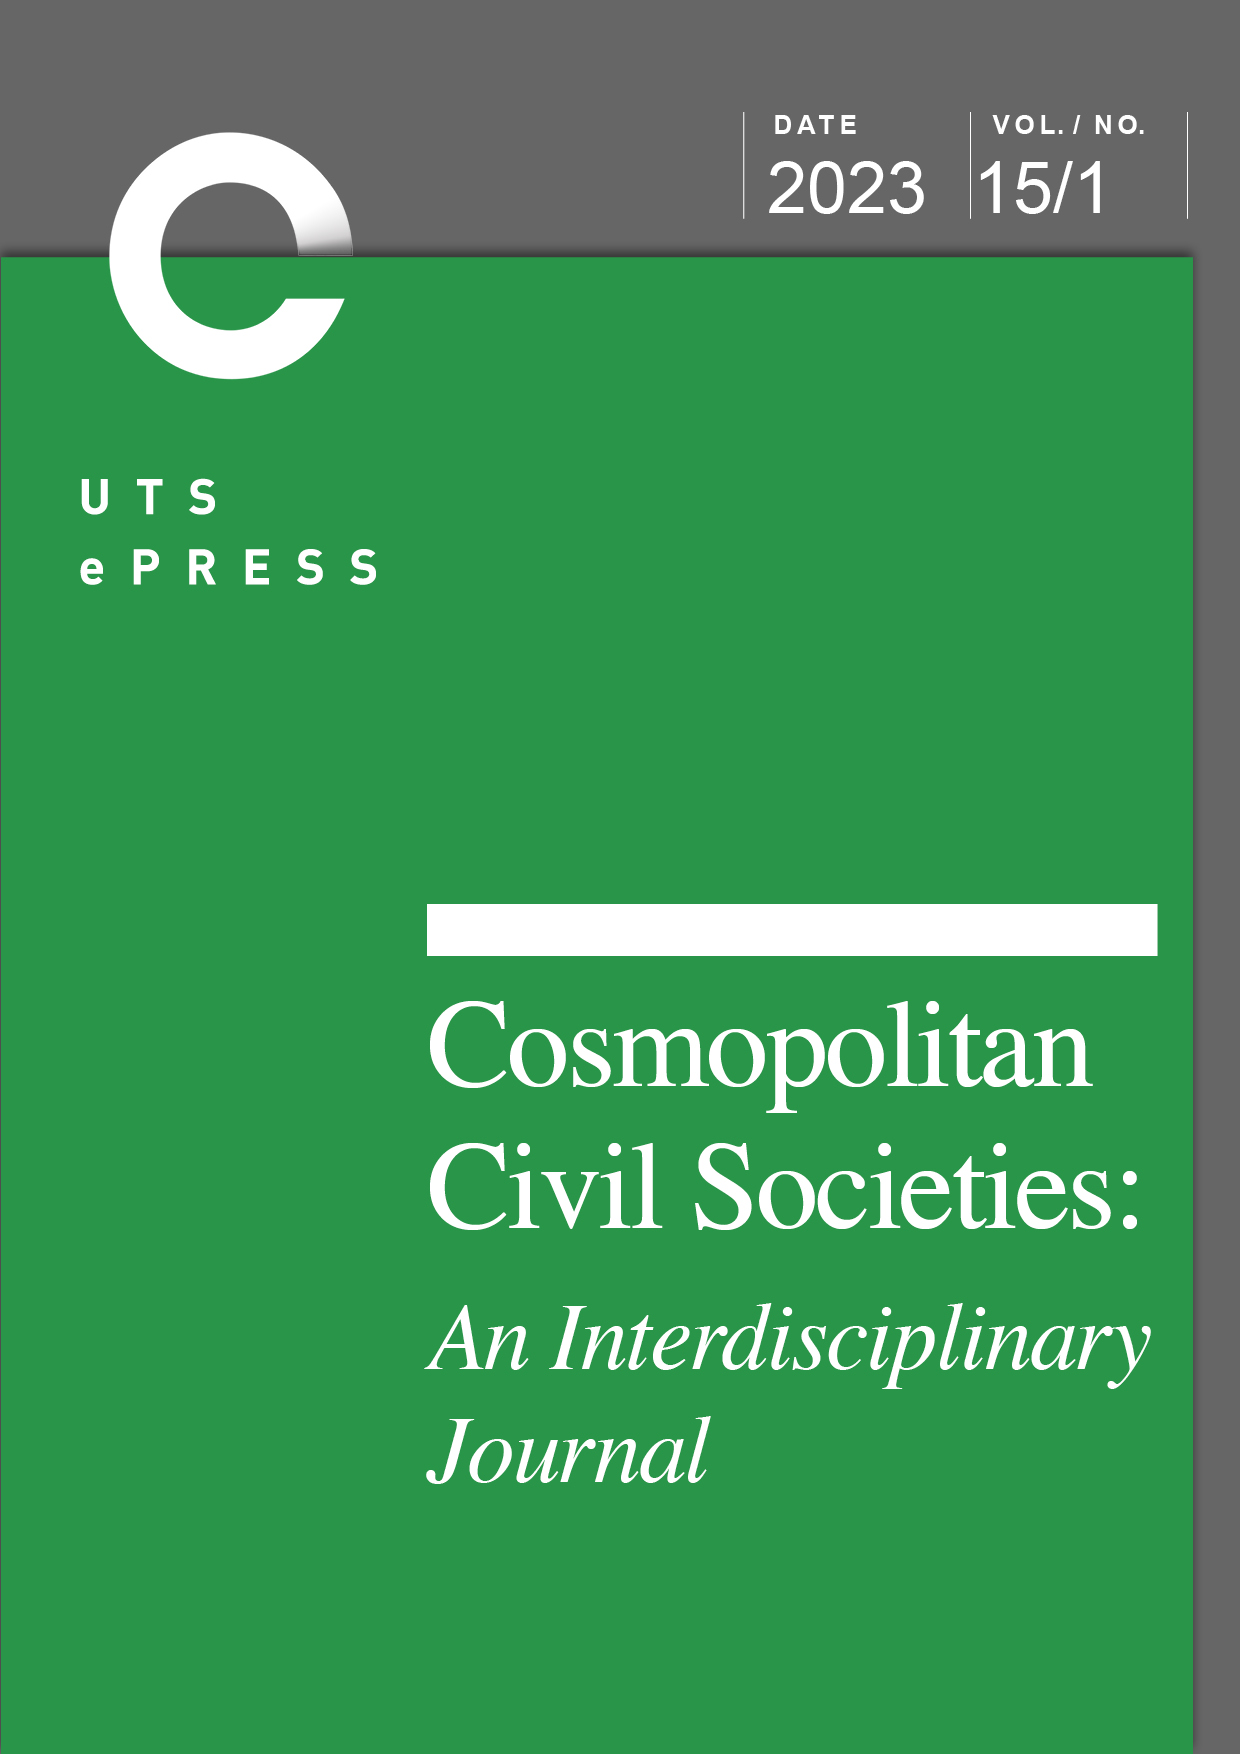 Cover of Cosmopolitan Civil Societies: An Interdisciplinary Journal, volume 15, number 1, published by UTS ePress